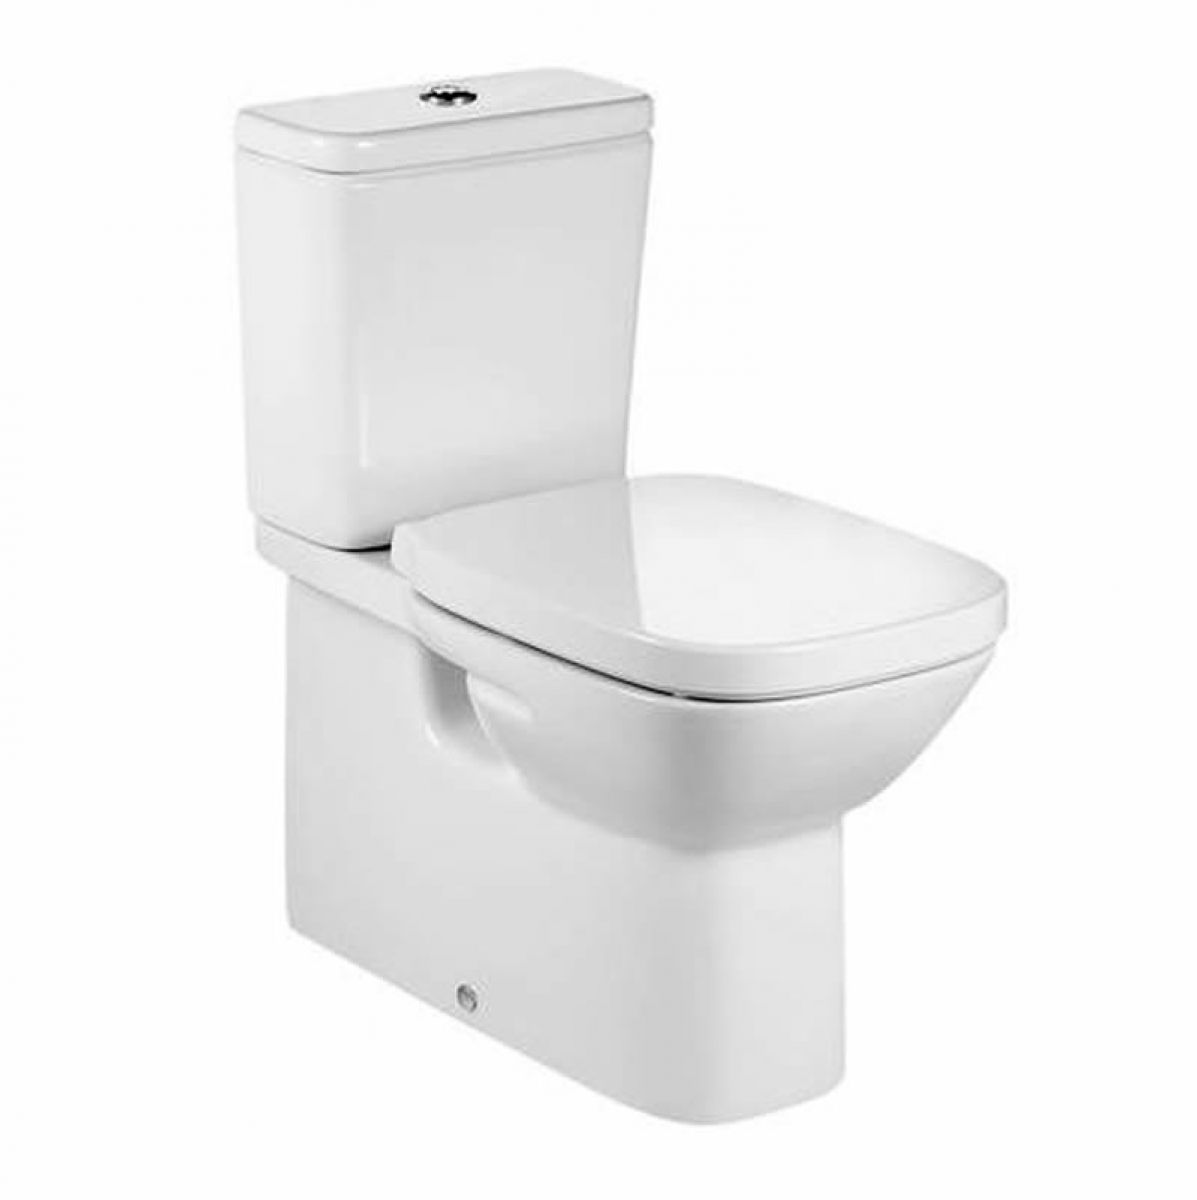  Roca  Debba Fully Back to Wall Close Coupled Toilet  